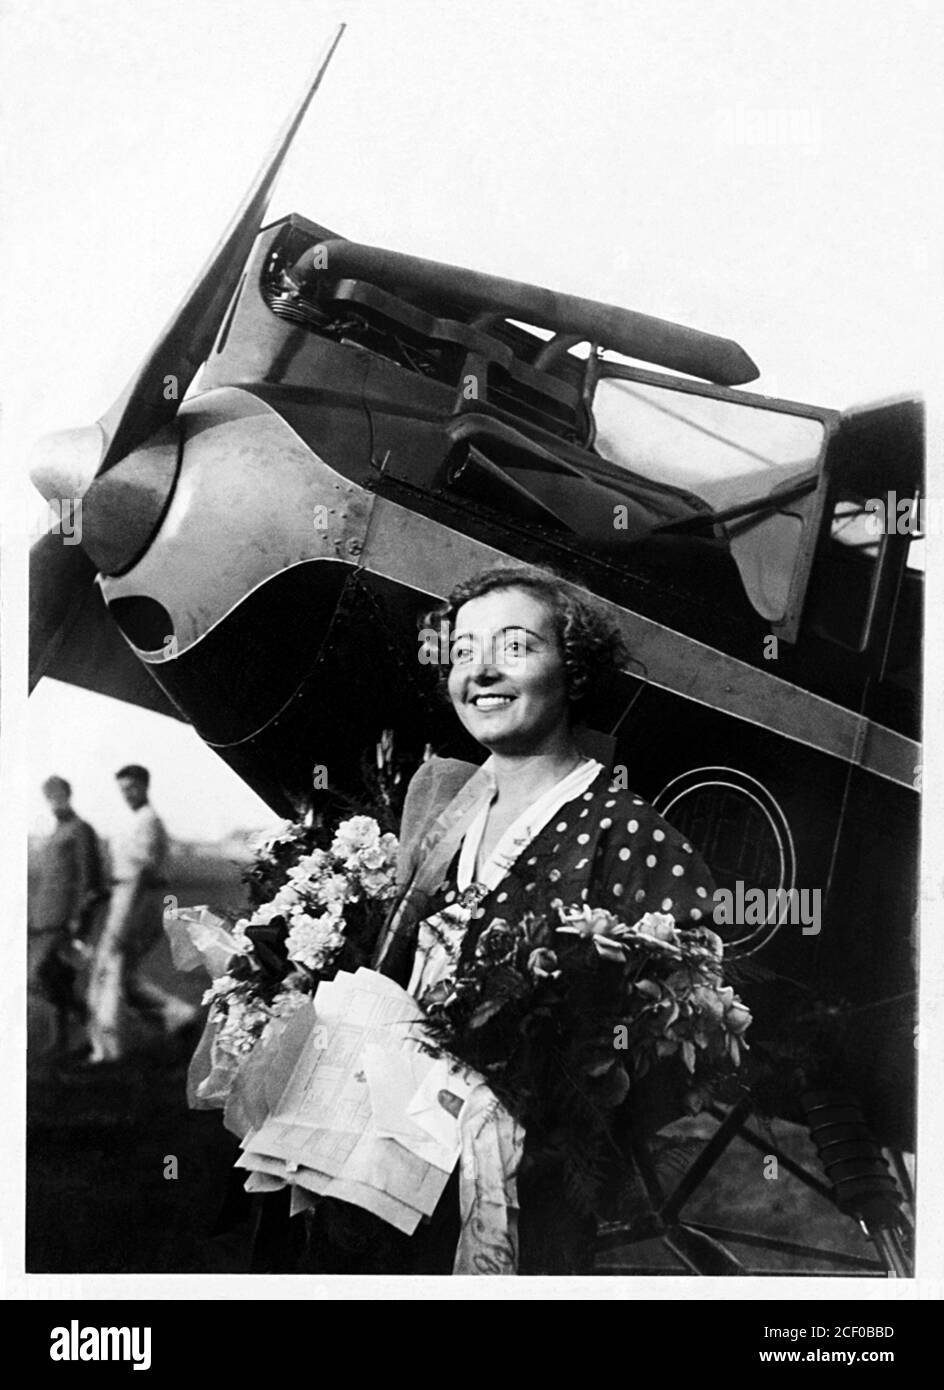 1932 , september , Milano , ITALY  : The italian woman aviator  GABRIELLA Gaby ANGELINI ( 1911 - 1932 ) with his airplane Breda Ba. 15 . Portrait by unknown photographer . She was the first Italian woman to complete a trans-European flight, travelling to eight European countries, for which she received a Golden Eagle Medal. In 1932 she left Italy on a solo flight to Delhi, India . Angelini encountered difficulties during a sandstorm in Libya , during the Raid Asiatico Milano-Delhi , and crashed in the desert and died. - PIONIERE DELL' ARIA - PIONIERI DEL VOLO - FLY - PIONIERS - AVIATRICE - AVI Stock Photo